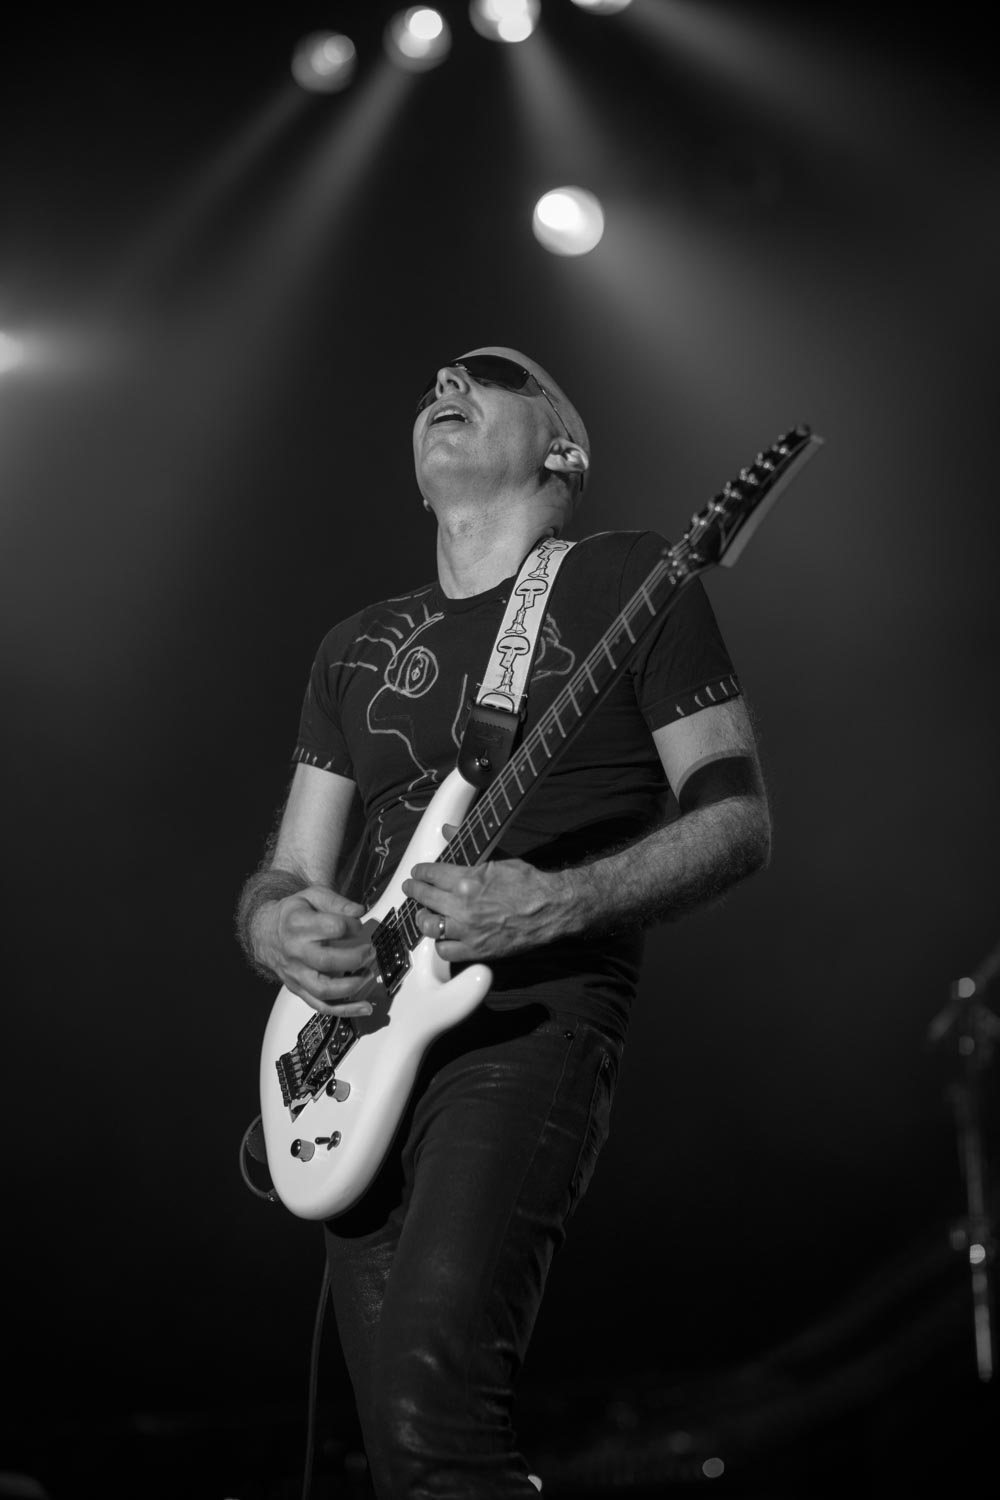 Joe Satriani during performance in New Plymouth - New Zealand.